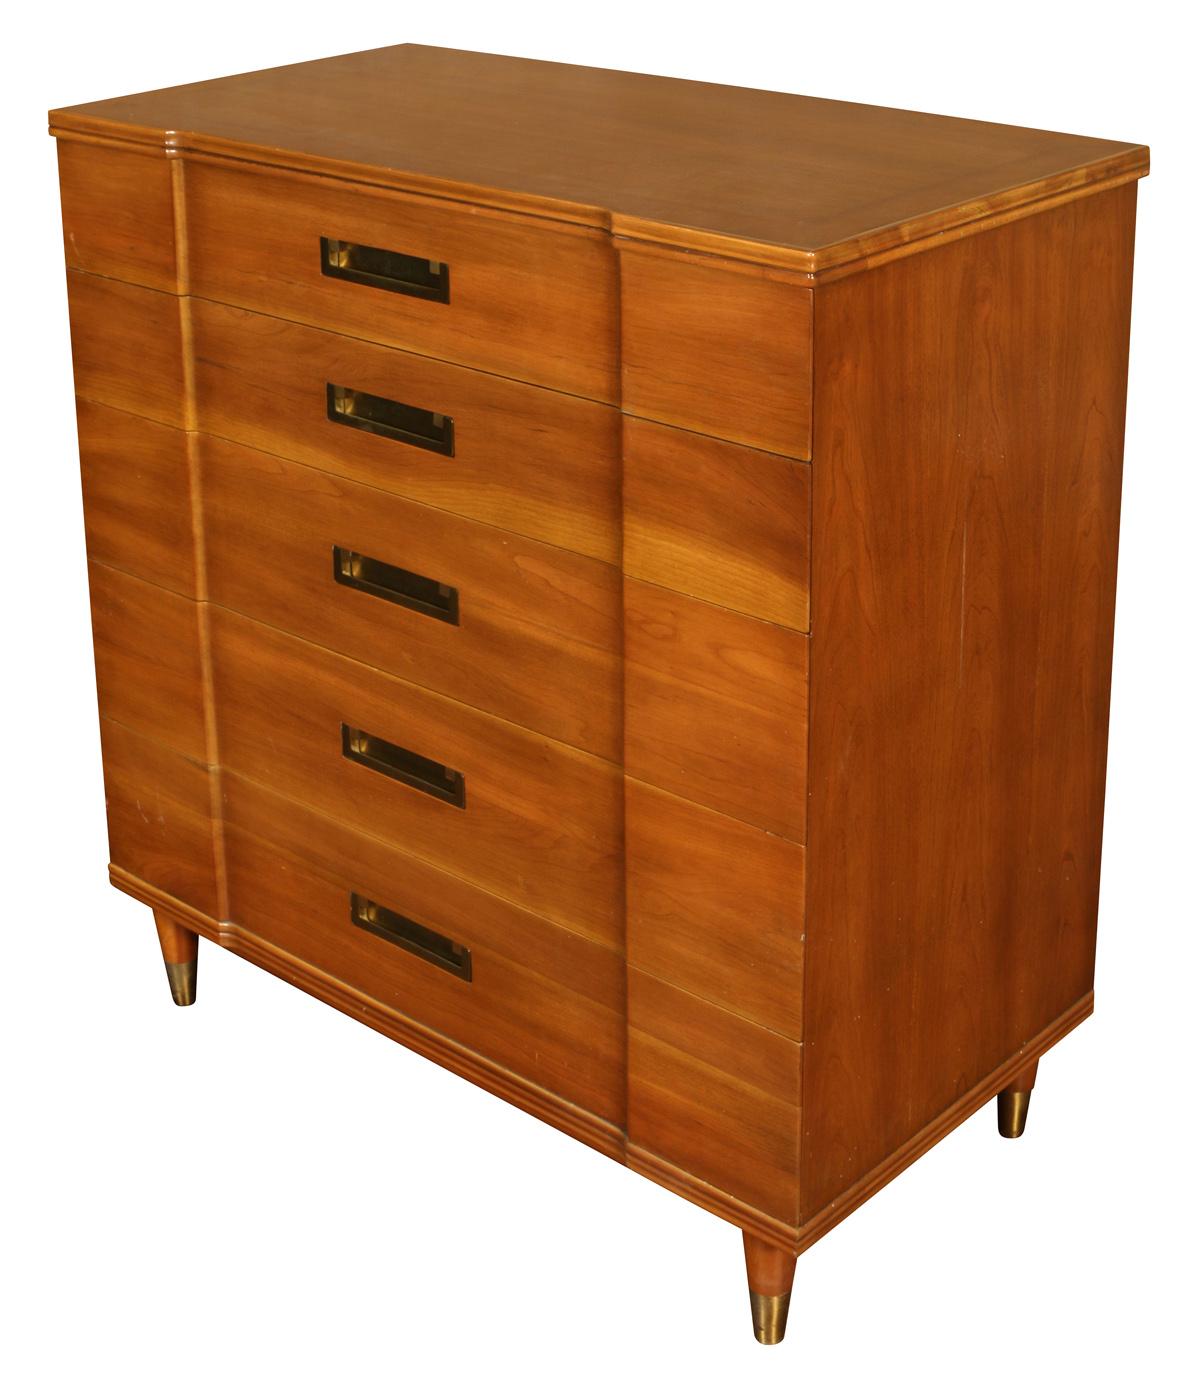 Tall five drawer Campaign chest by John Clingman for Widdicomb, with brass pulls.